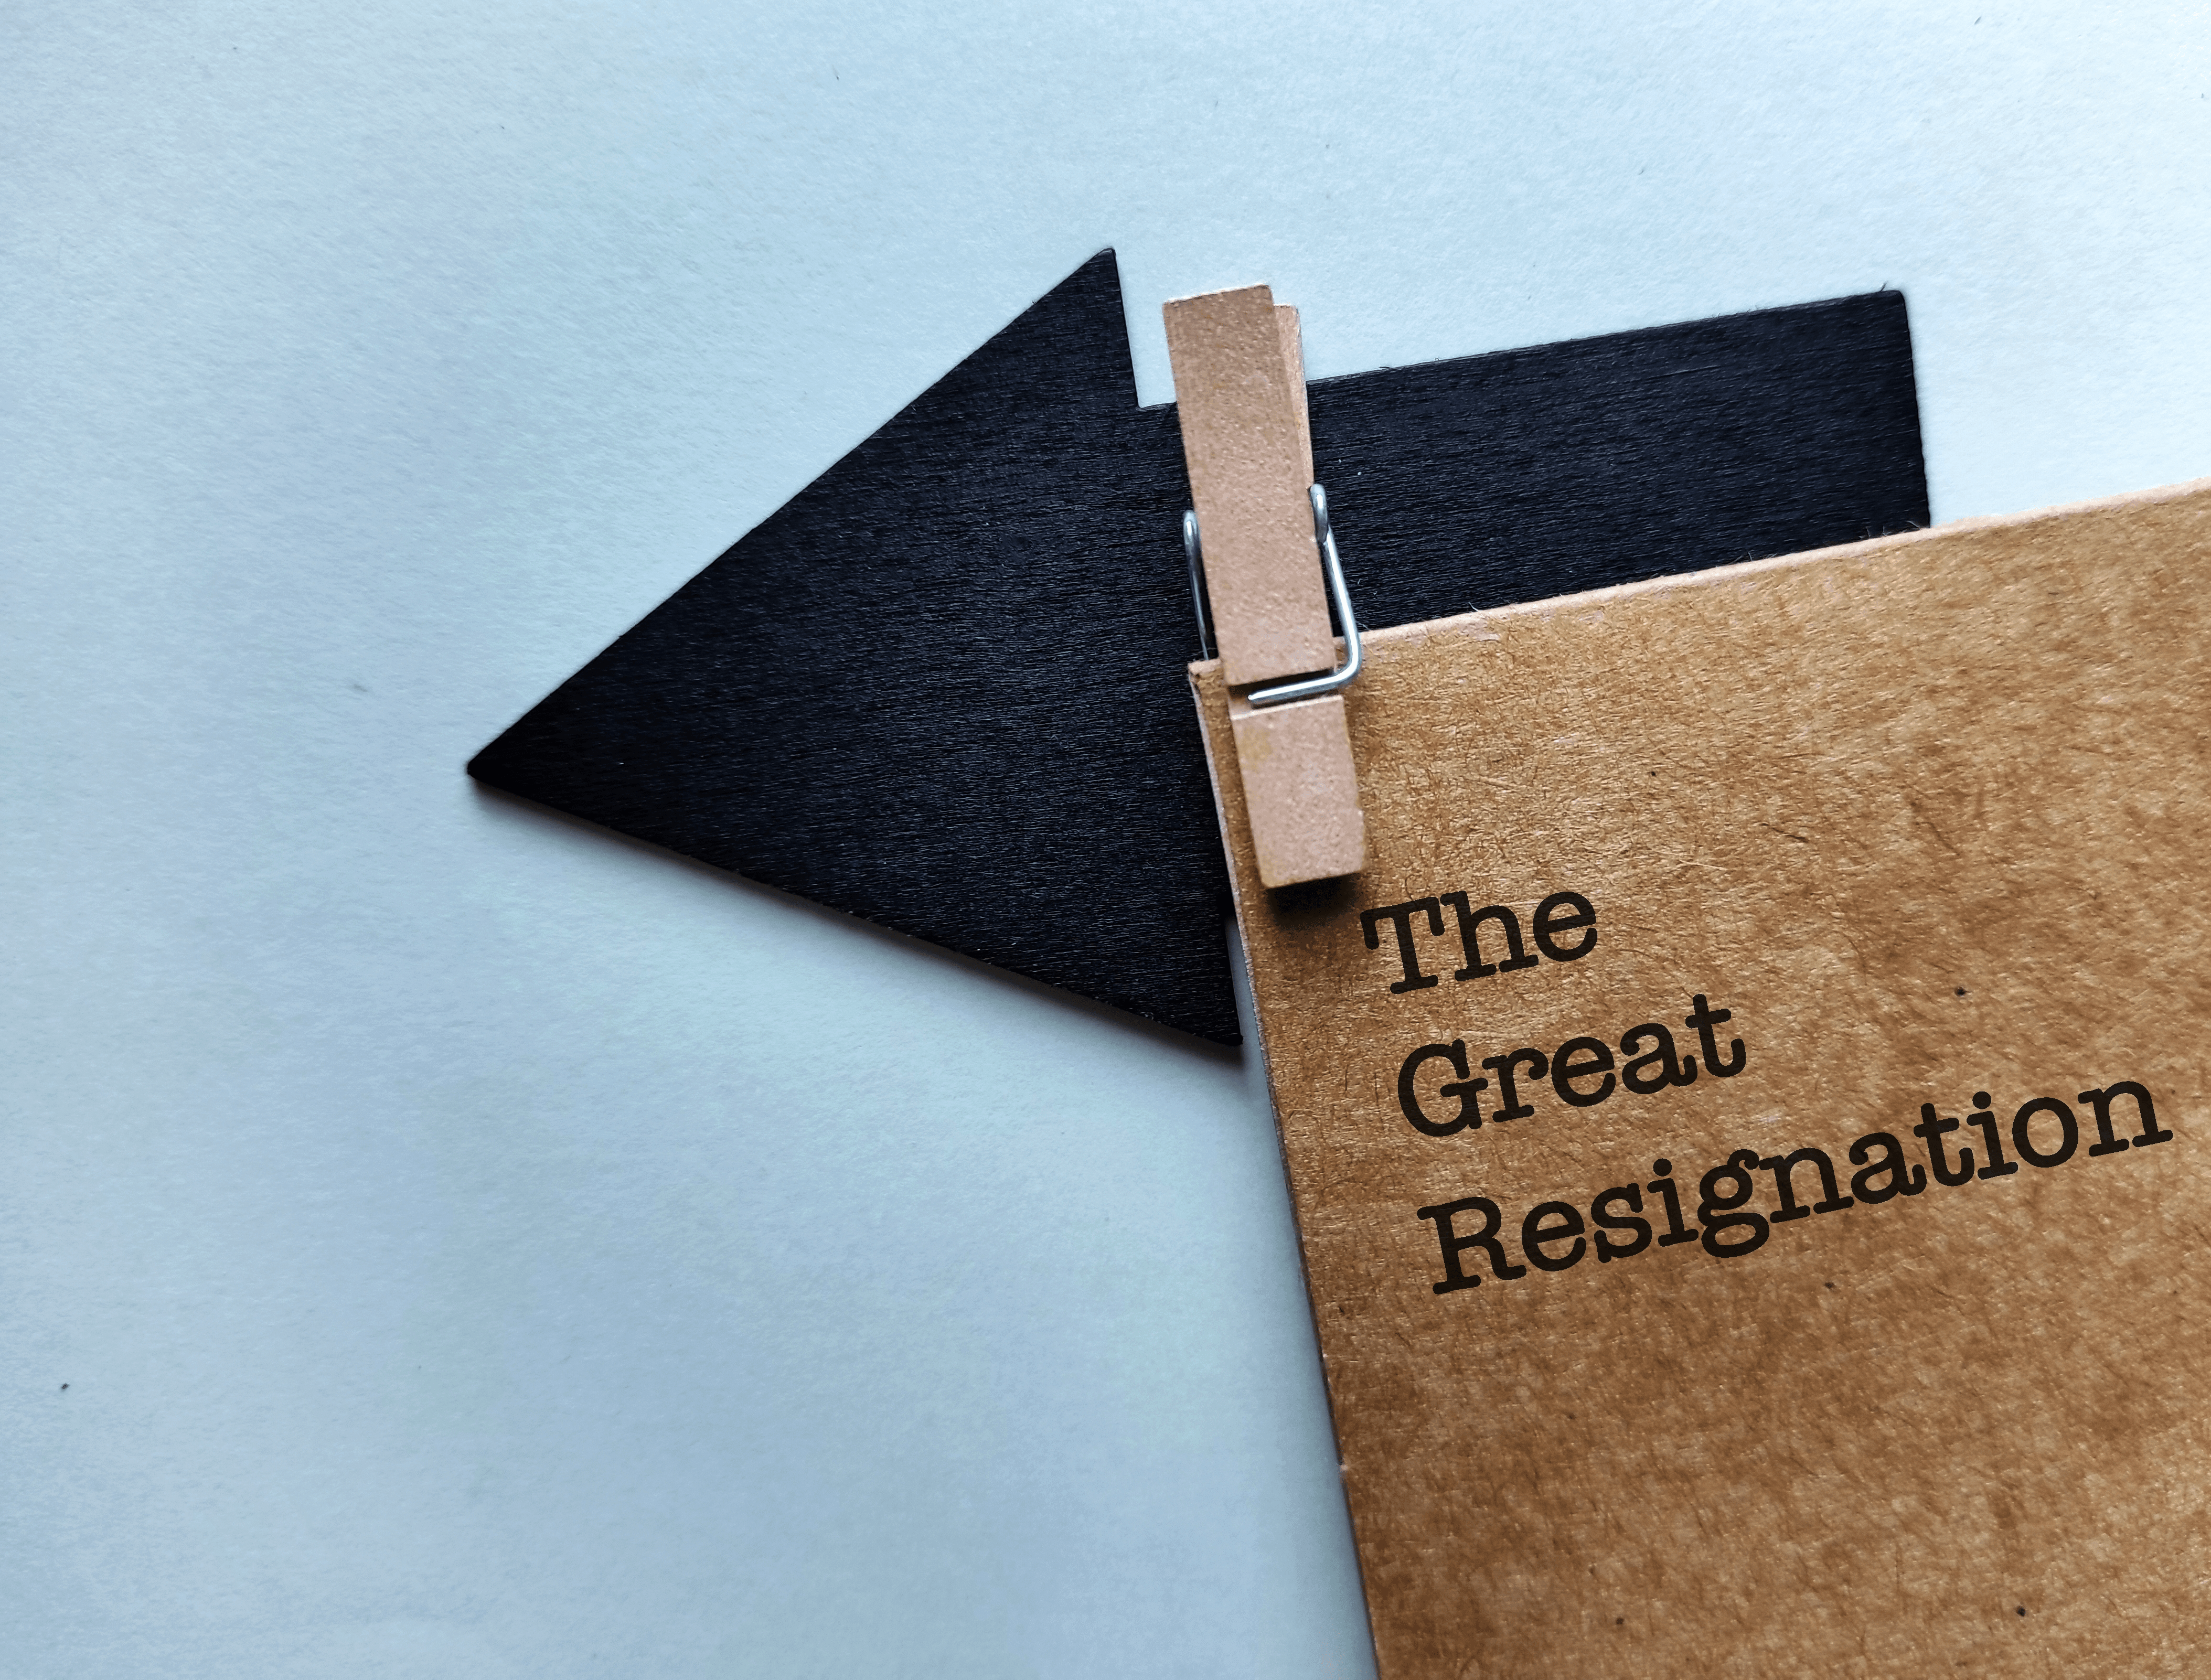 The Great Resignation and how your business can prepare